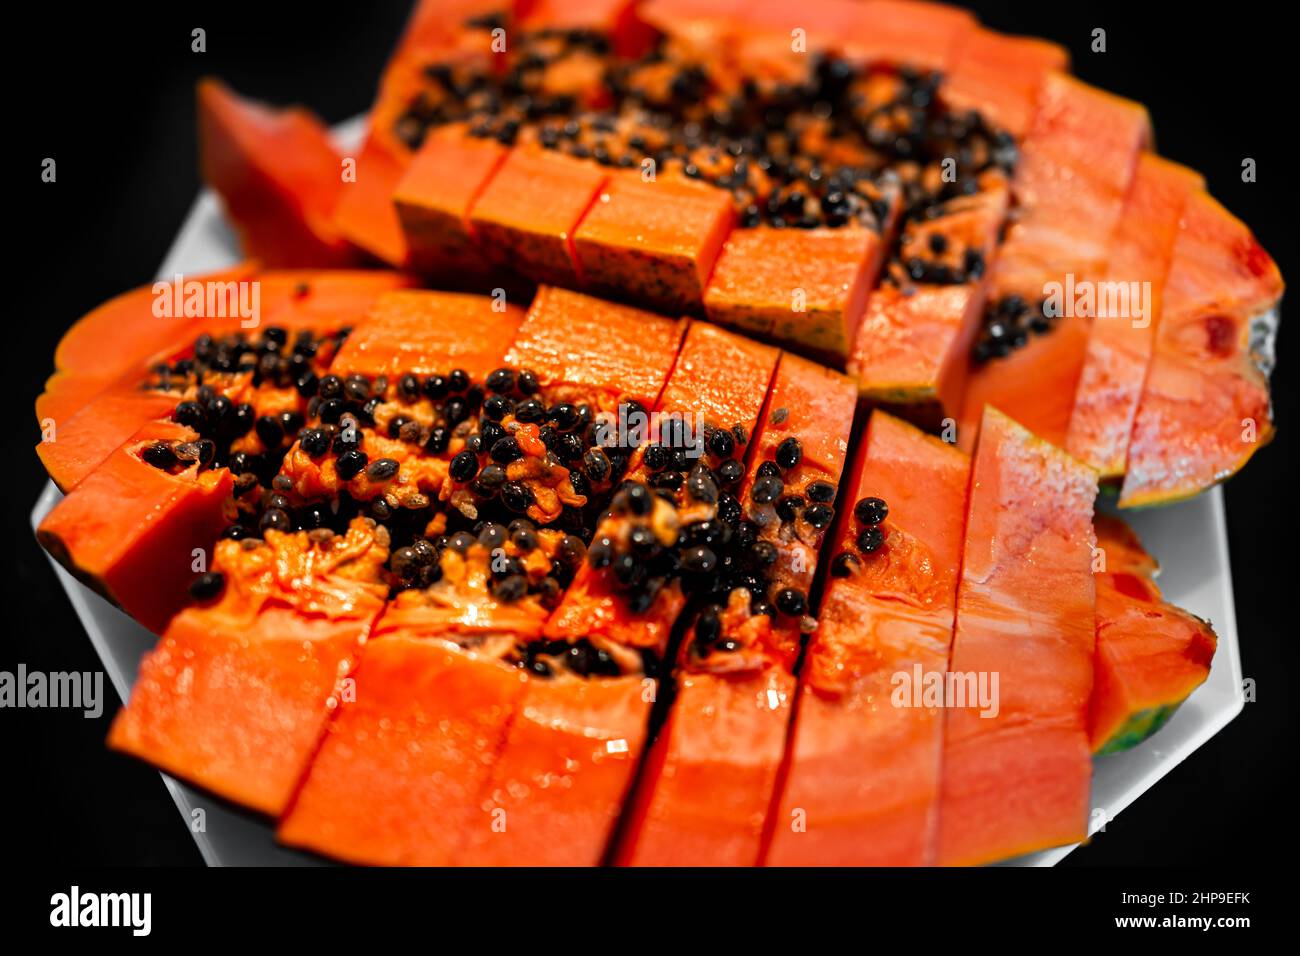 Closeup macro of large Caribbean red ripe papaya fruit sliced two halves slices with fresh orange red colorful flesh cut in half on plate with black b Stock Photo